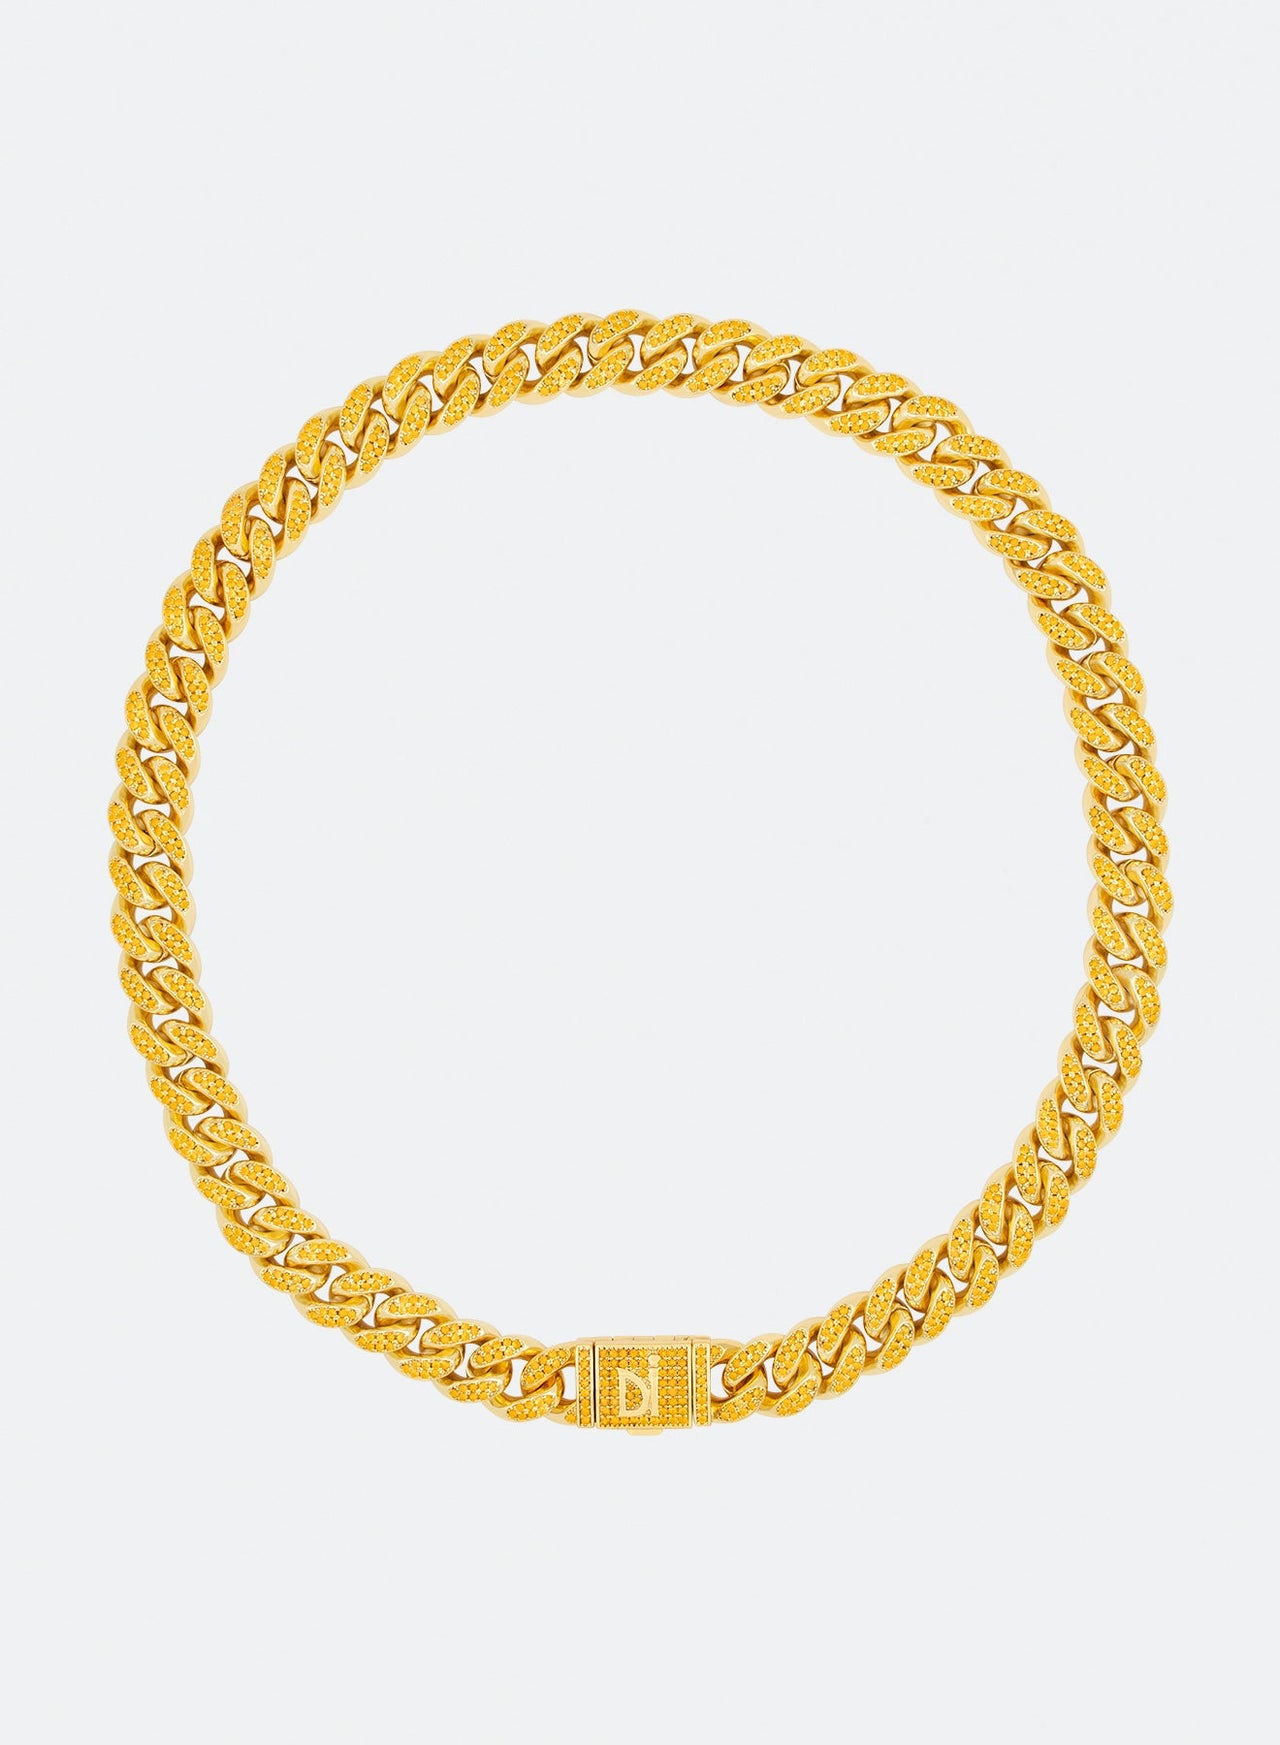 18k yellow gold coated cuban chain necklace with hand-set micropavé stones in tiger yellow